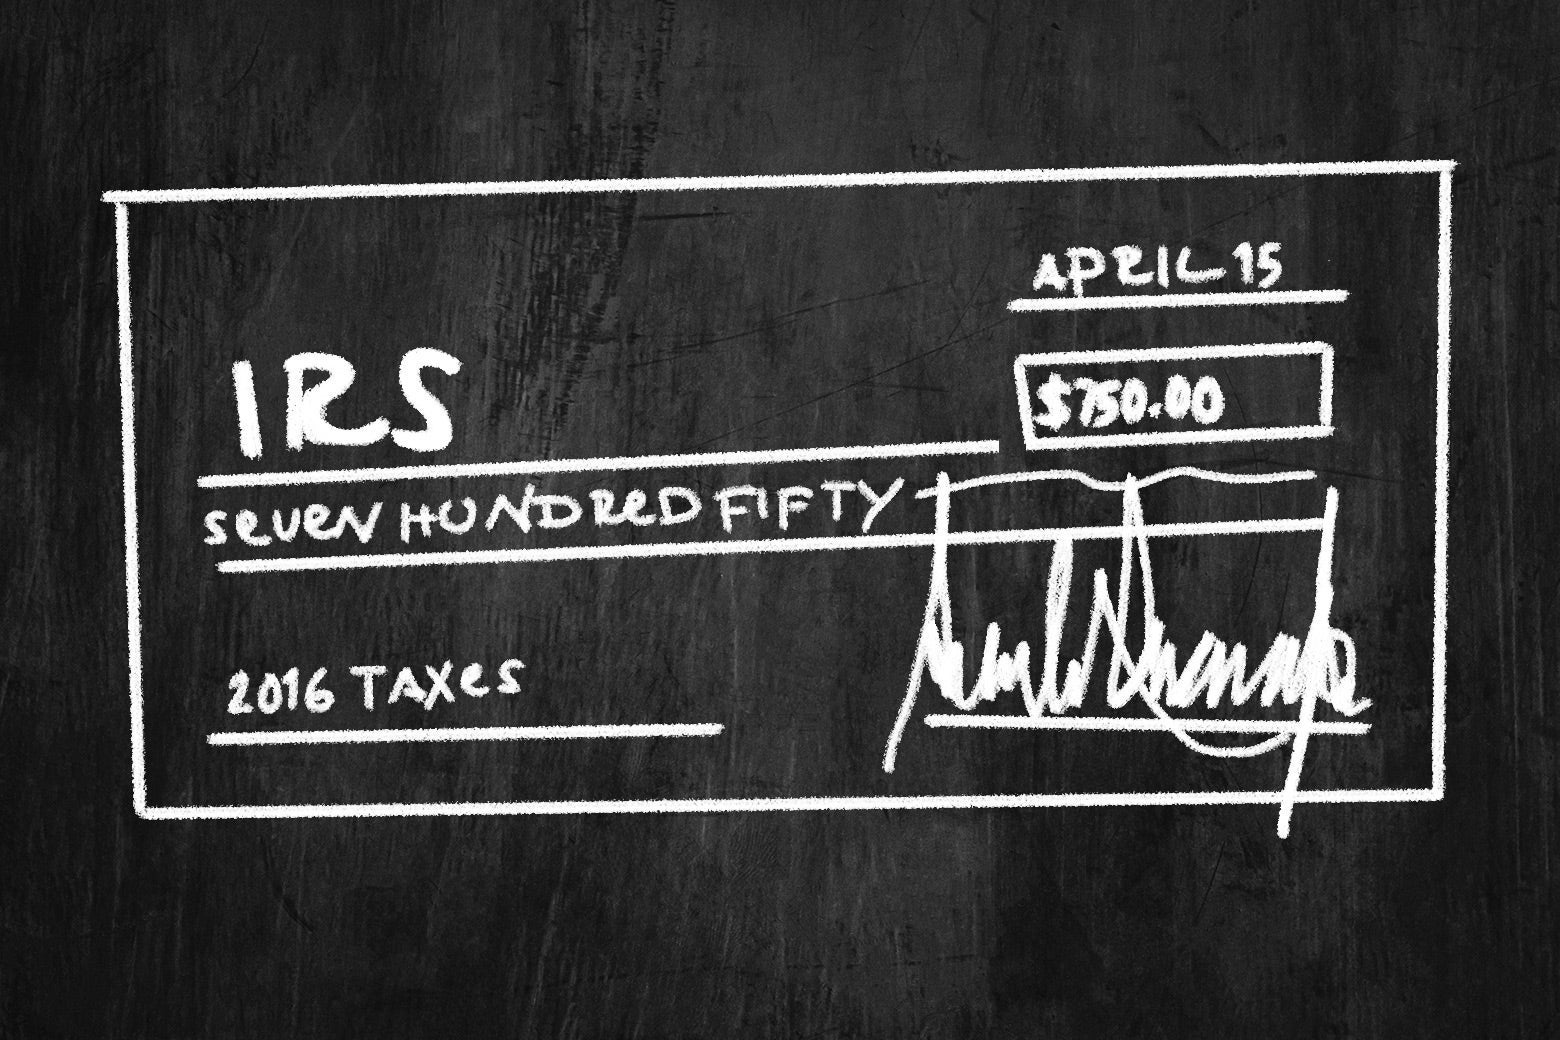 A check for $750 to the IRS, scrawled on a blackboard.